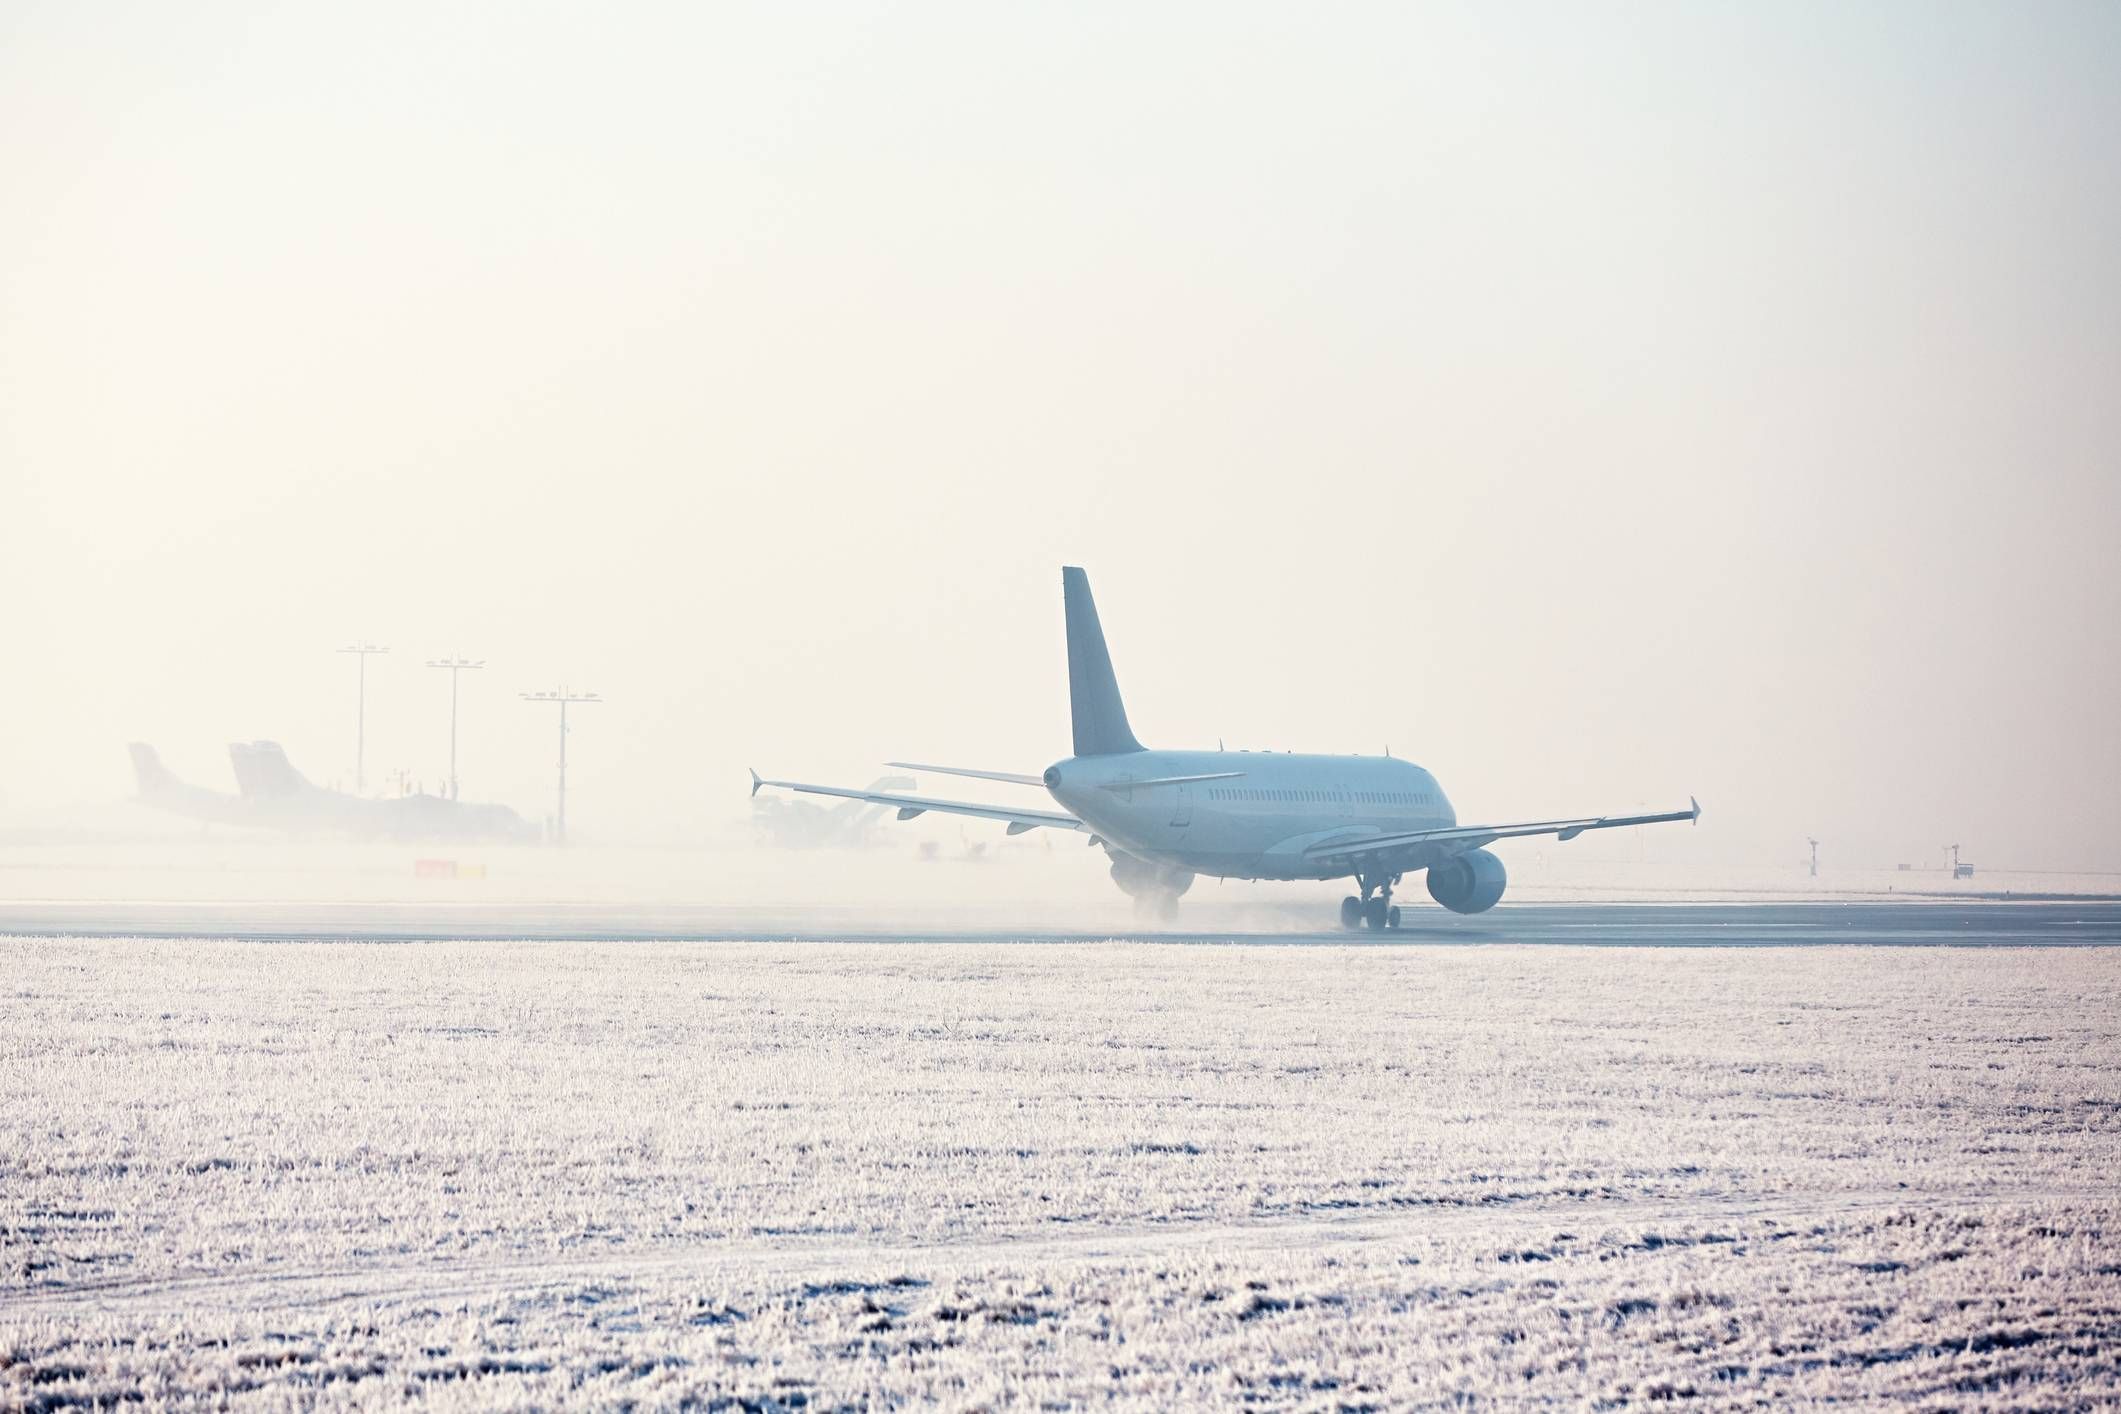 Image Post Implementation Webinar on Global Reporting Format for Runway Surface Conditions